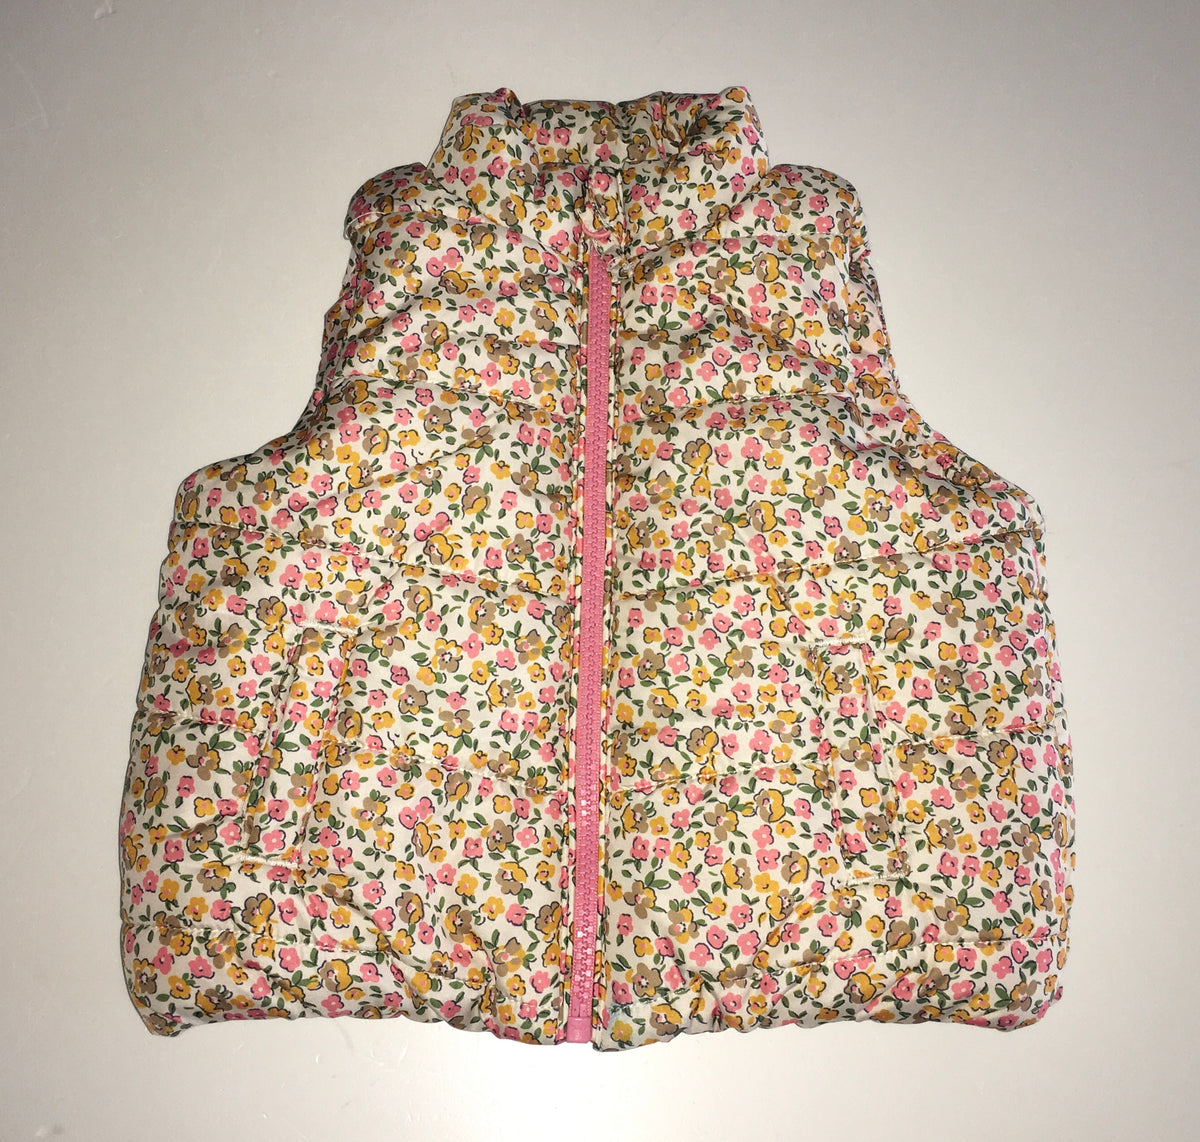 Mothercare Gilet, Girls 9-12 Months